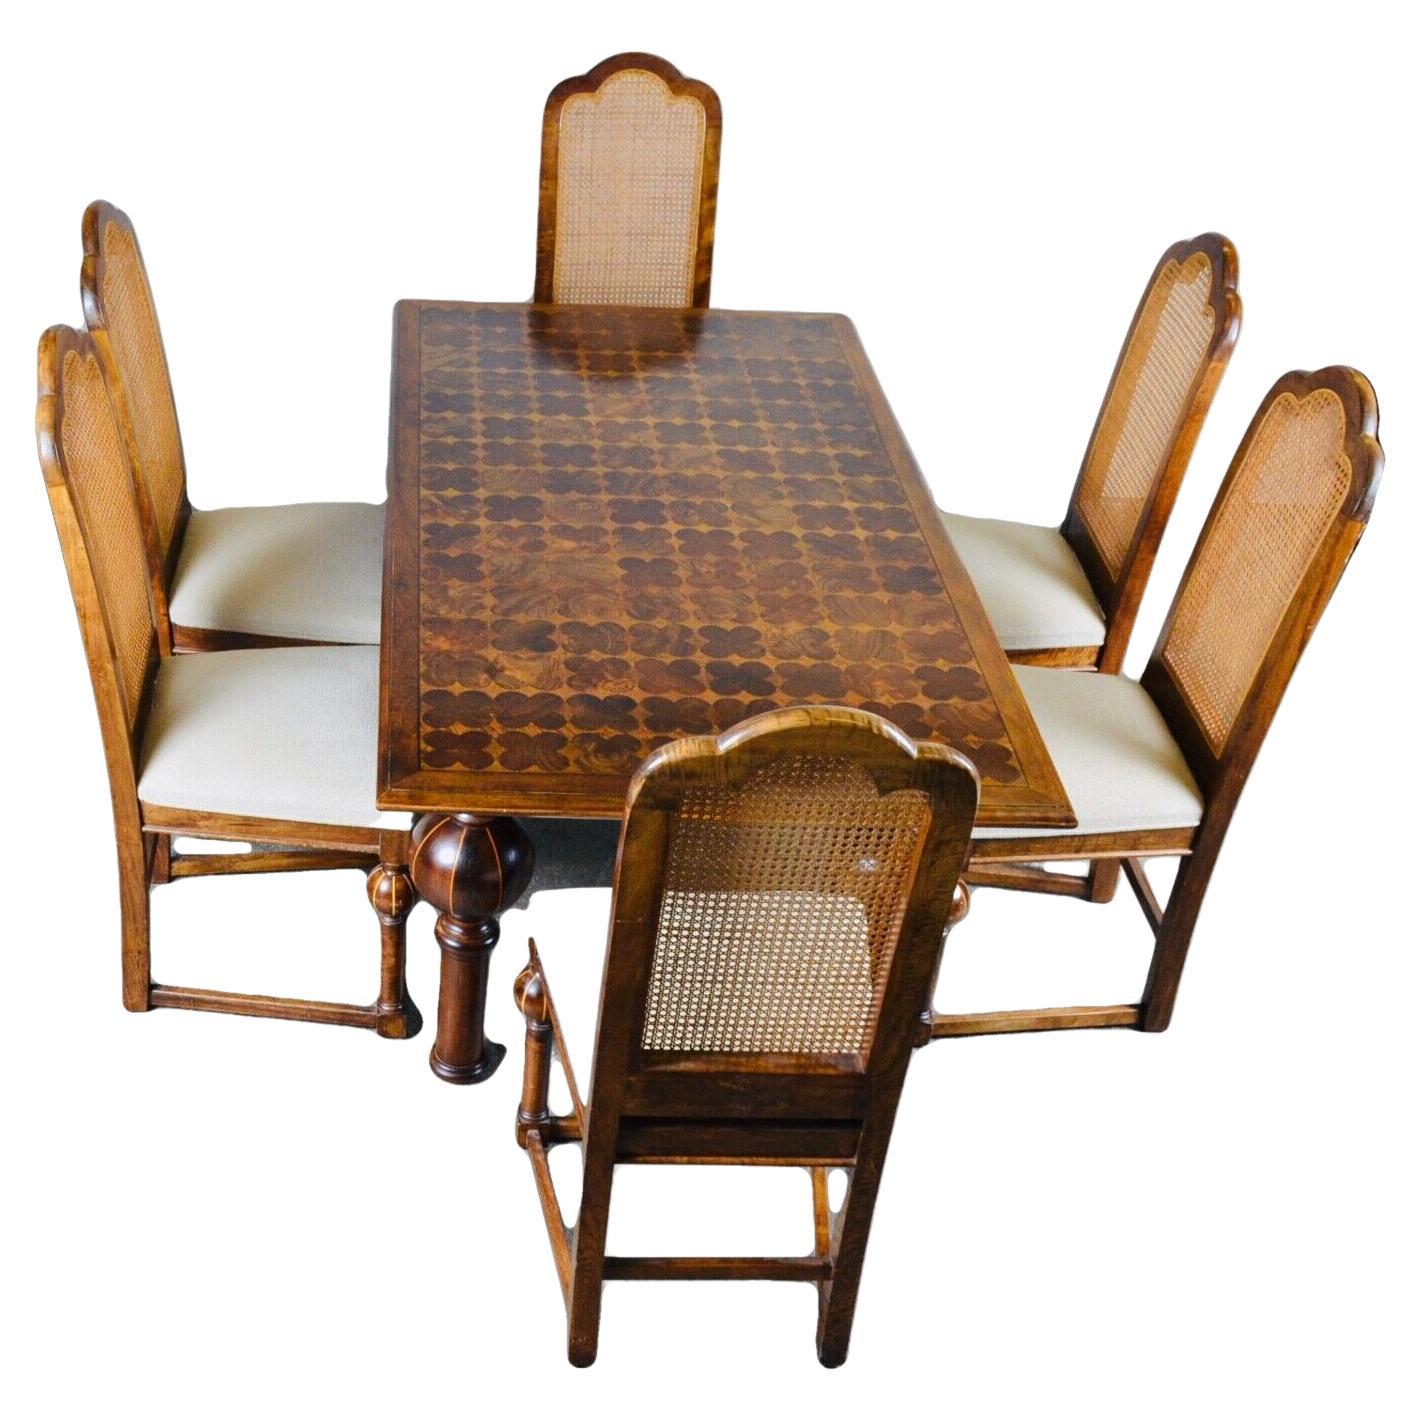 Stunning Walnut Parquetry Inlaid Dining Table and Set of 6 Chairs, Bulbous Legs